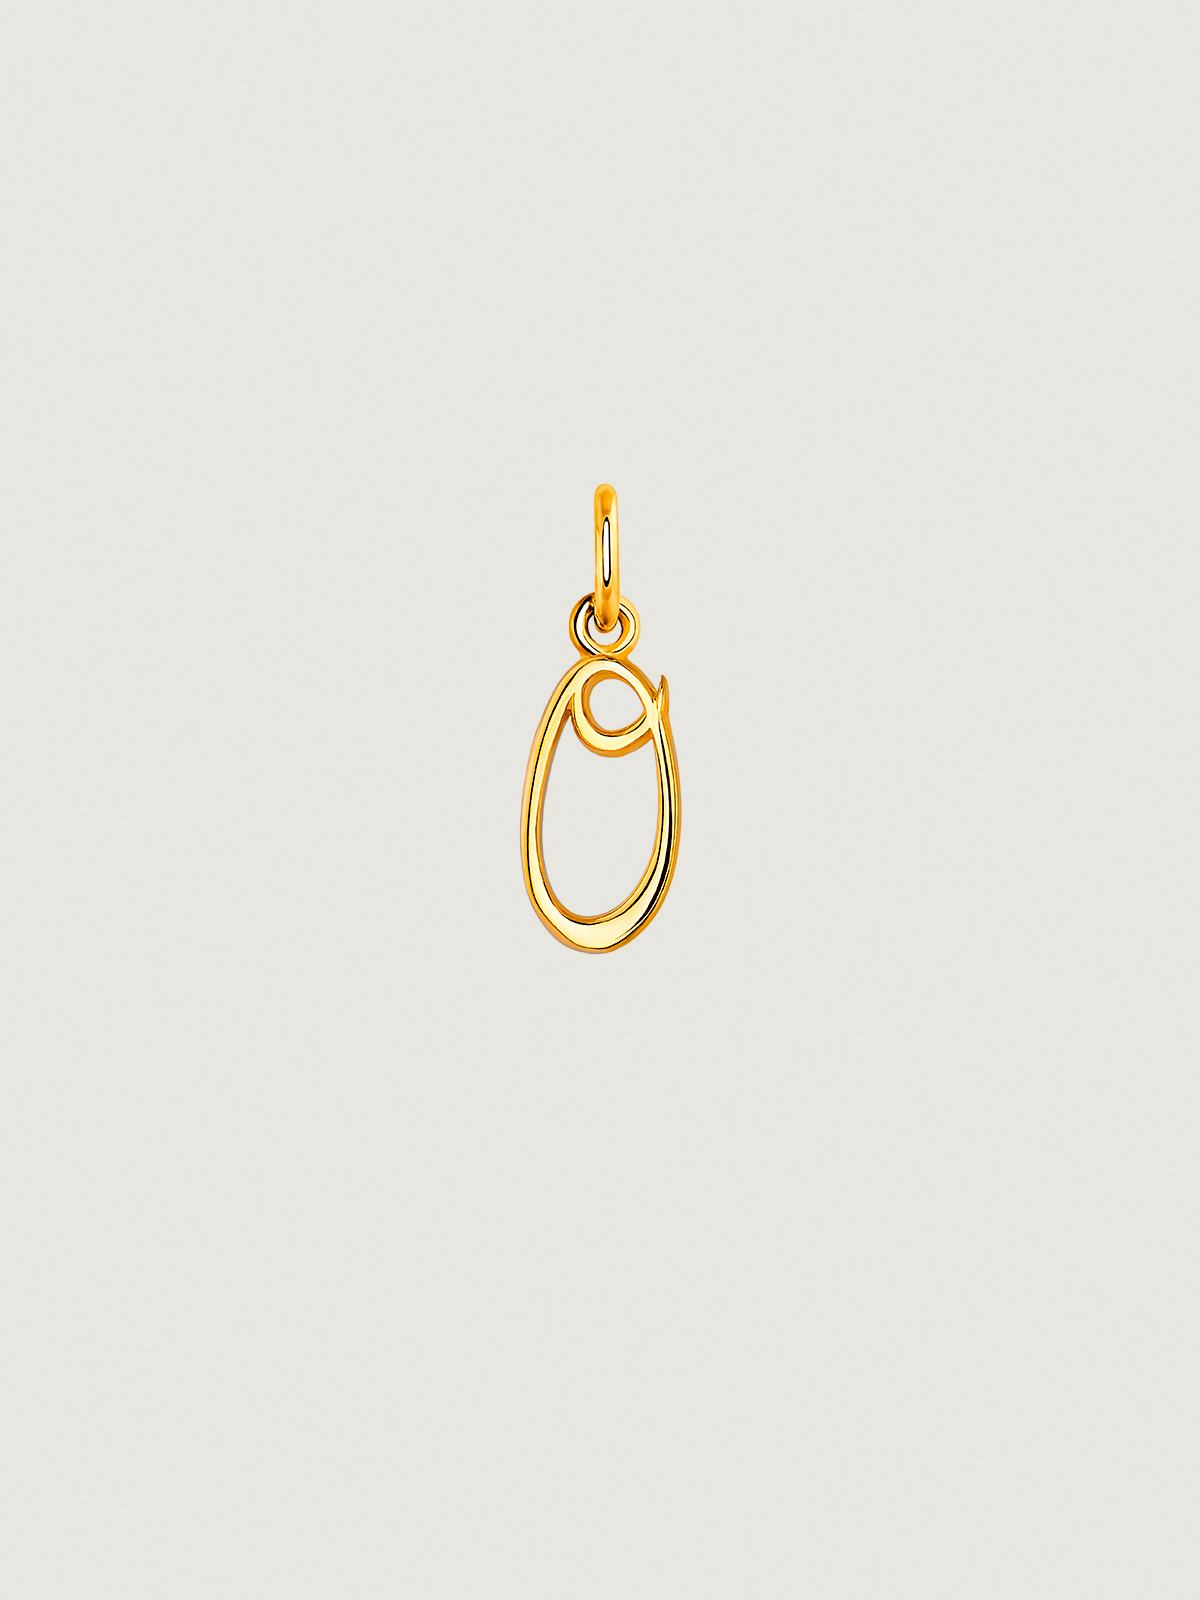 925 Silver charm dipped in 18K yellow gold with initial O